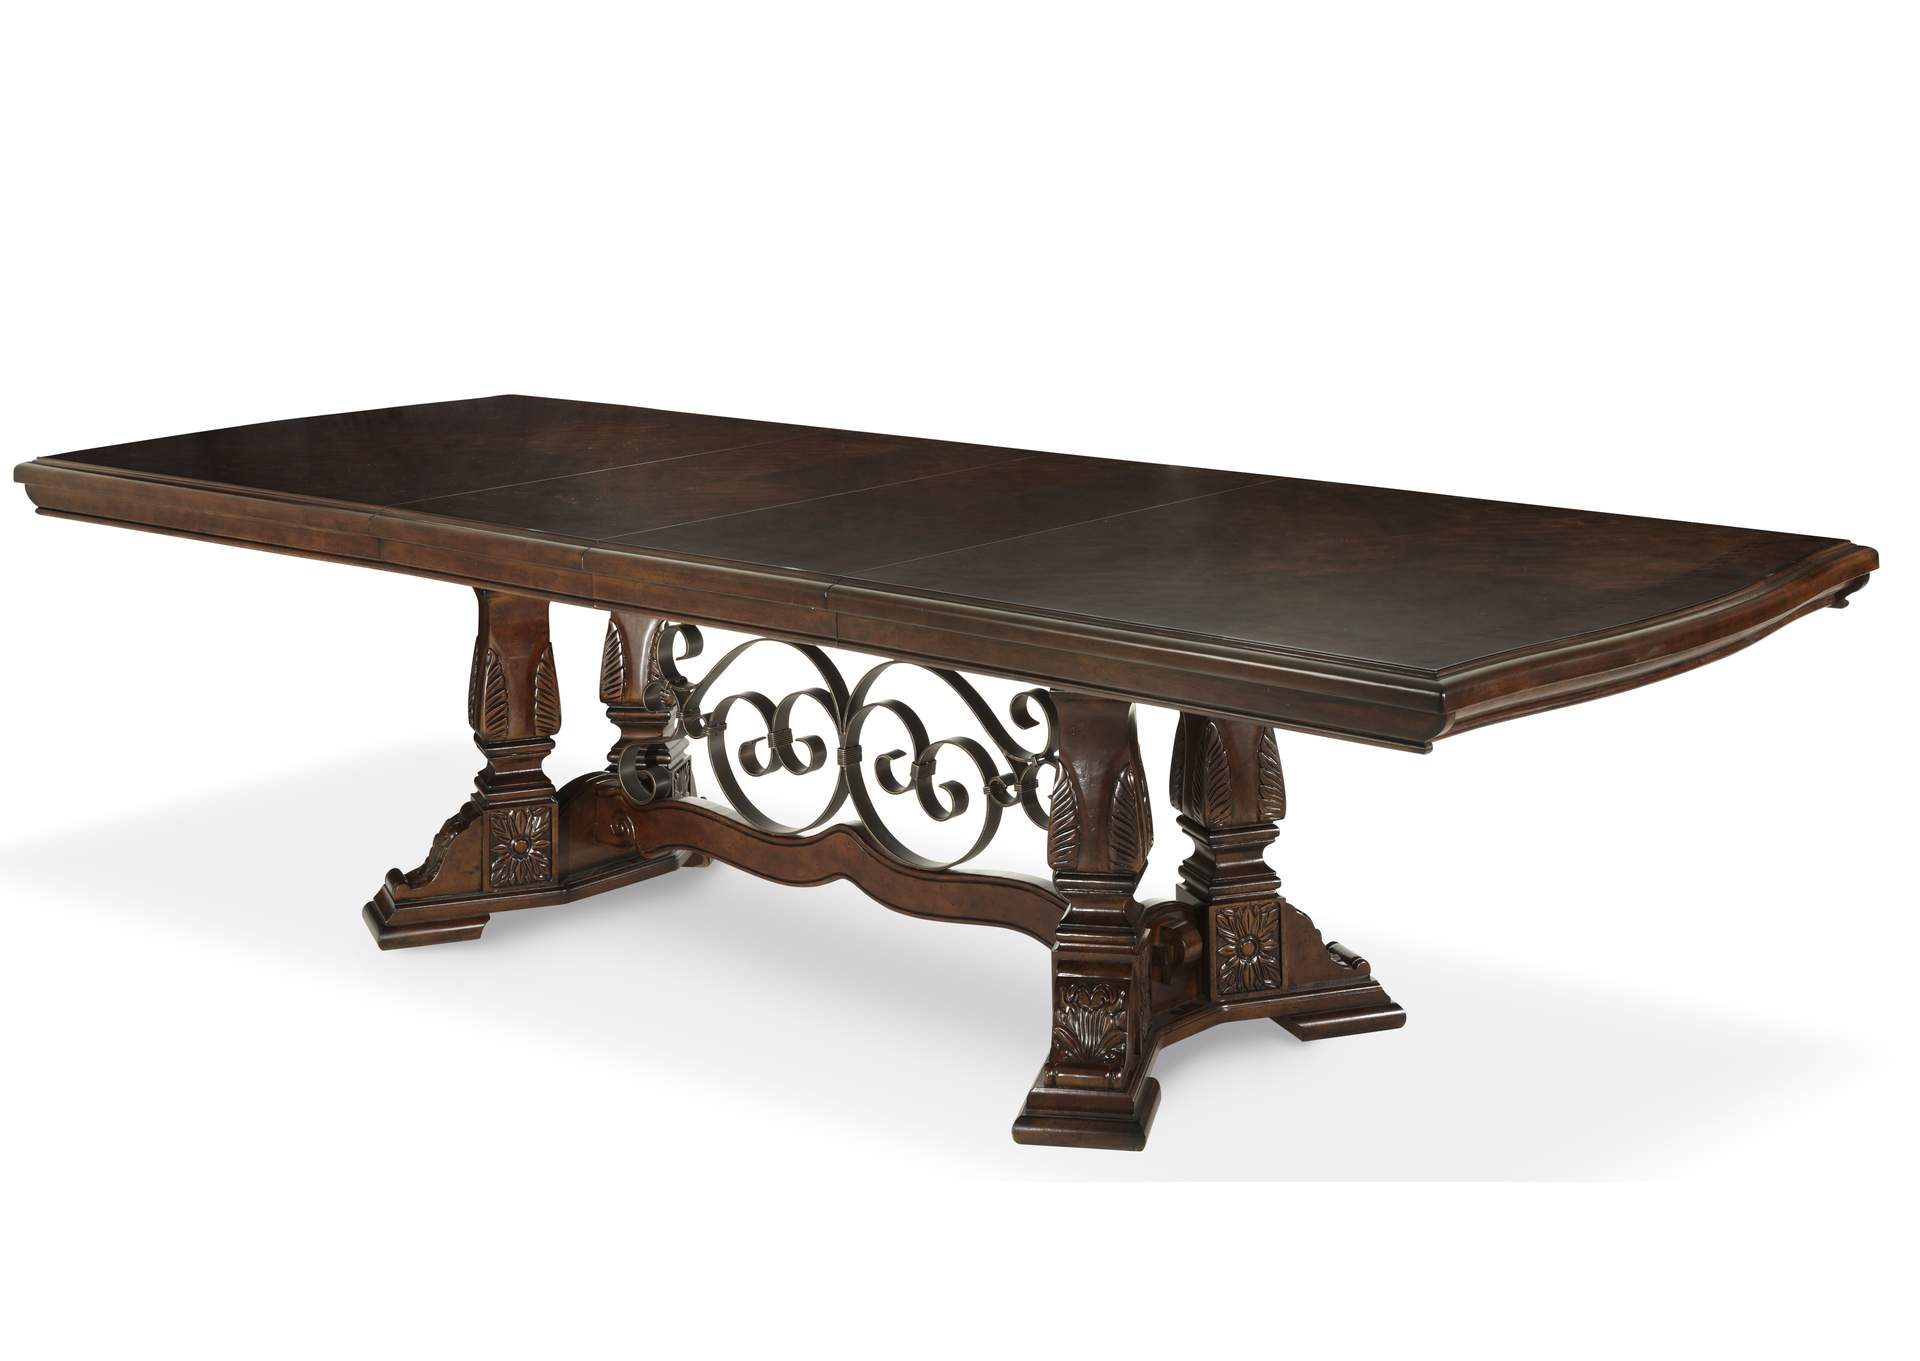 Windsor Court Vintage Fruitwood Rectangular Dining Table w/2 20" Leaves,Michael Amini (AICO)